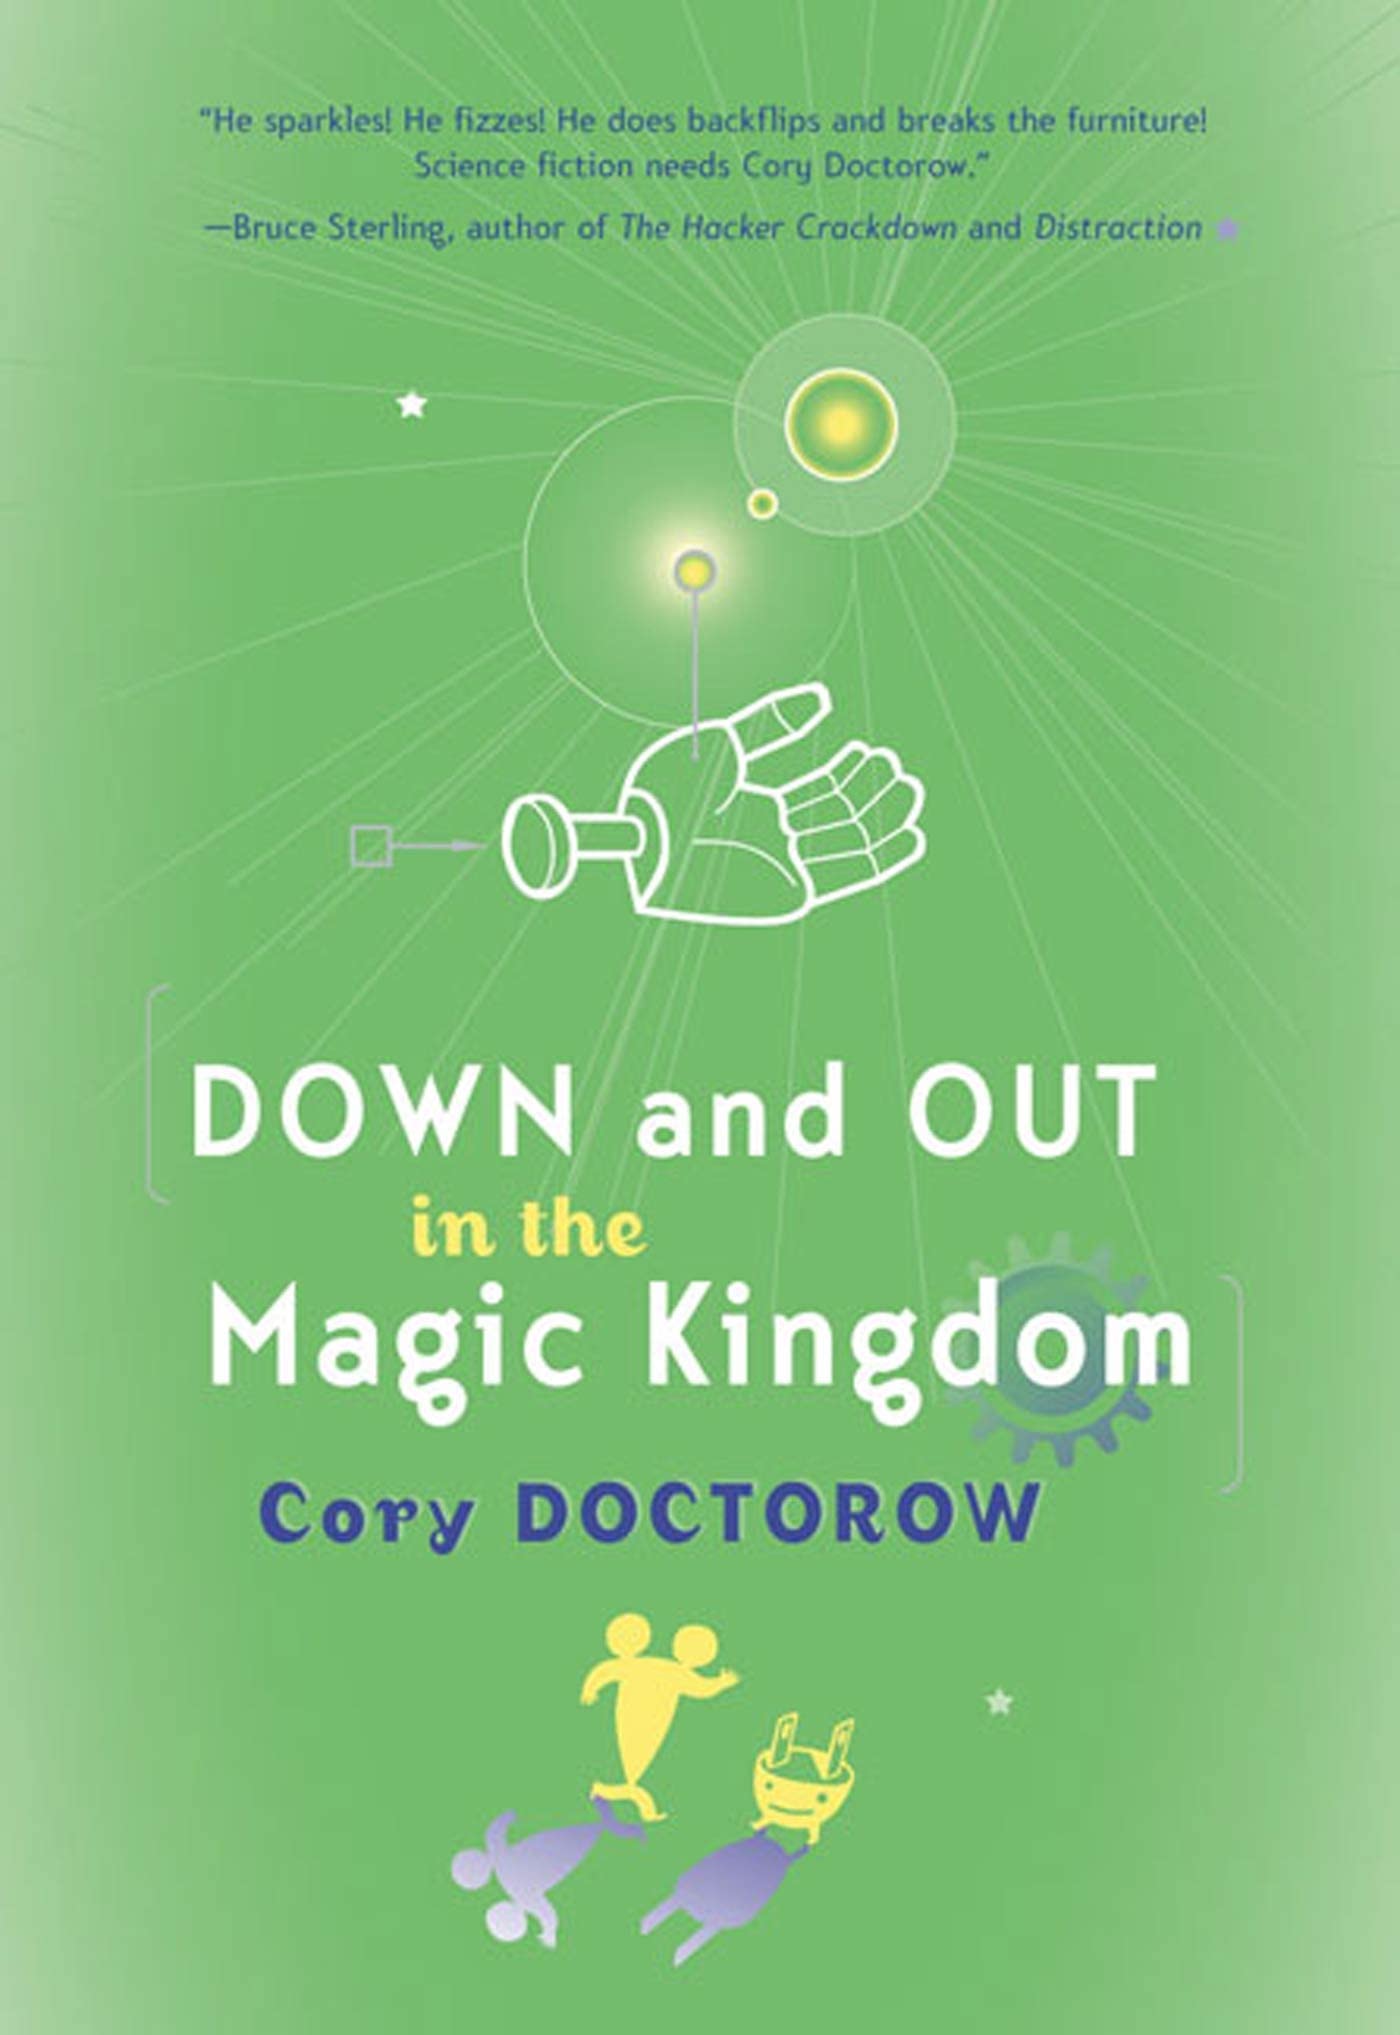 Cory Doctorow: Down and Out in the Magic Kingdom (Paperback, 2003, Tor Books)